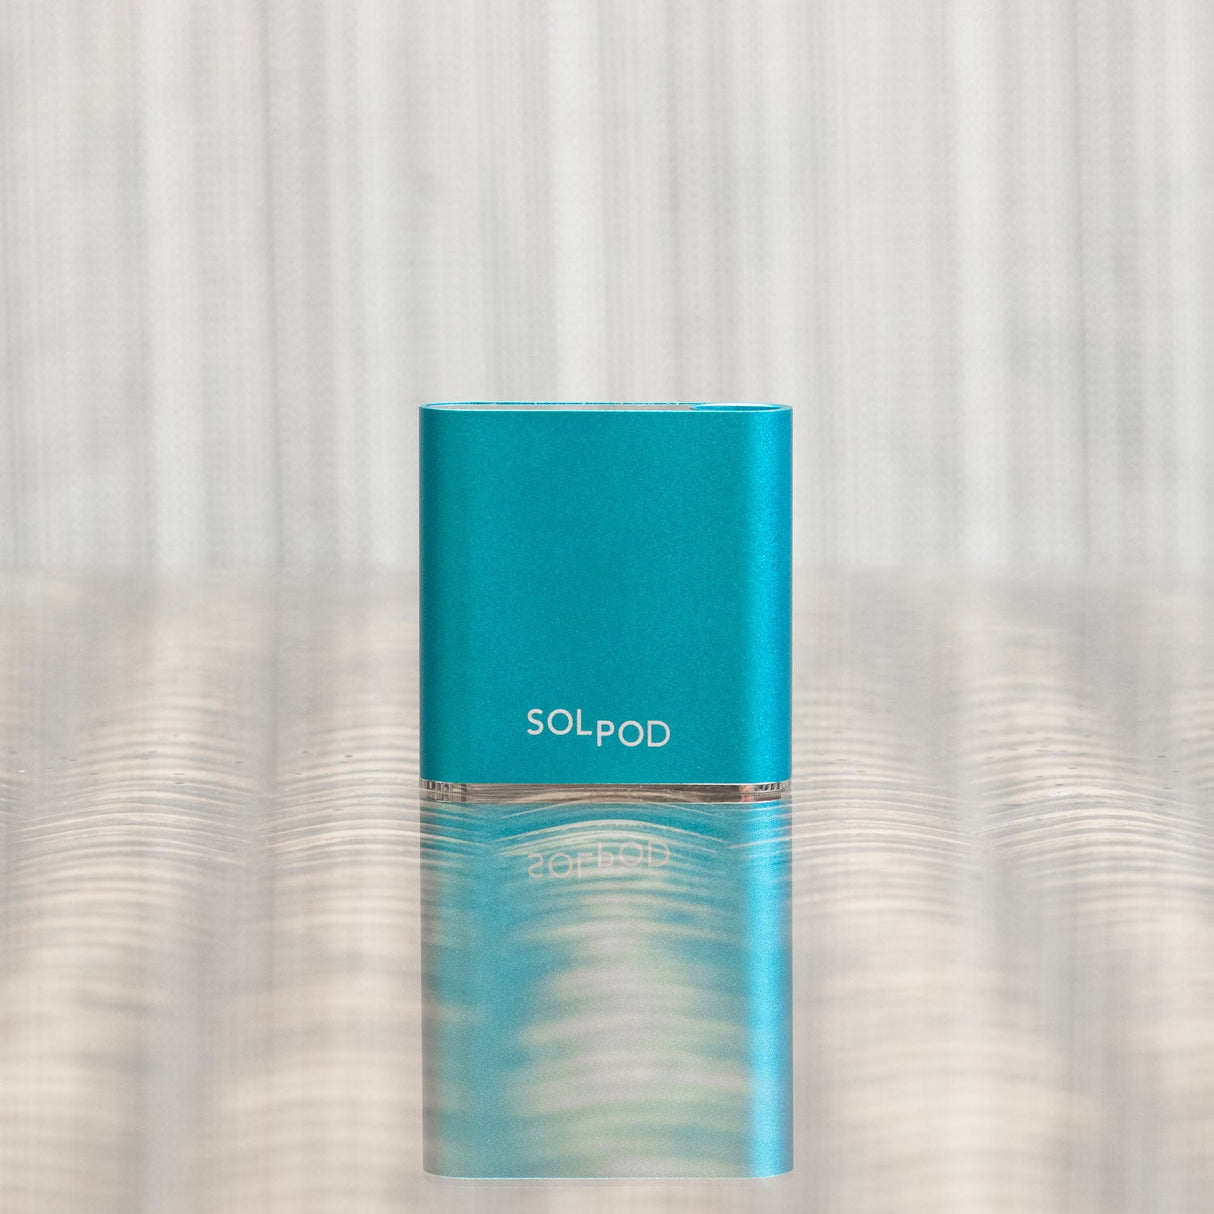 Helio Supply SolPod Express Kit in teal, compact vaporizer for on-the-go use, front view